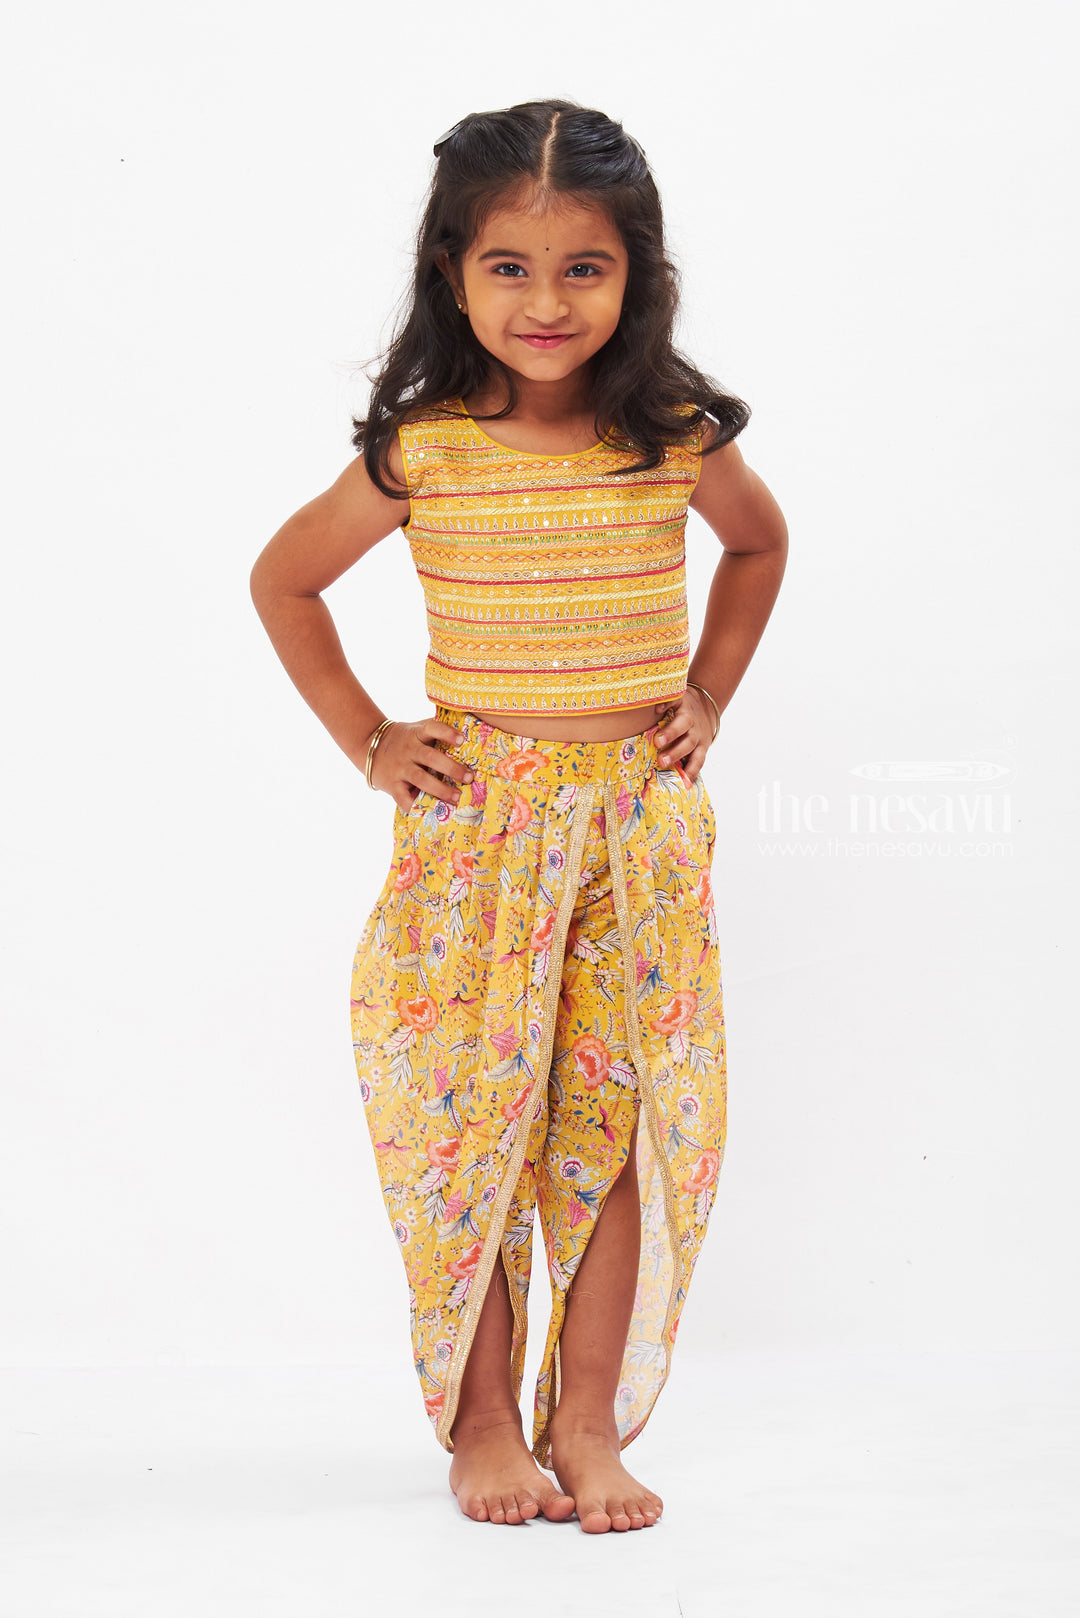 The Nesavu Girls Dothi Sets Vibrant Yellow Crop Top with Floral Dhoti Pant Set for Girls Nesavu Girls Yellow Crop Top Floral Dhoti Pant Set | Festive Ethnic Wear for Girls | The Nesavu